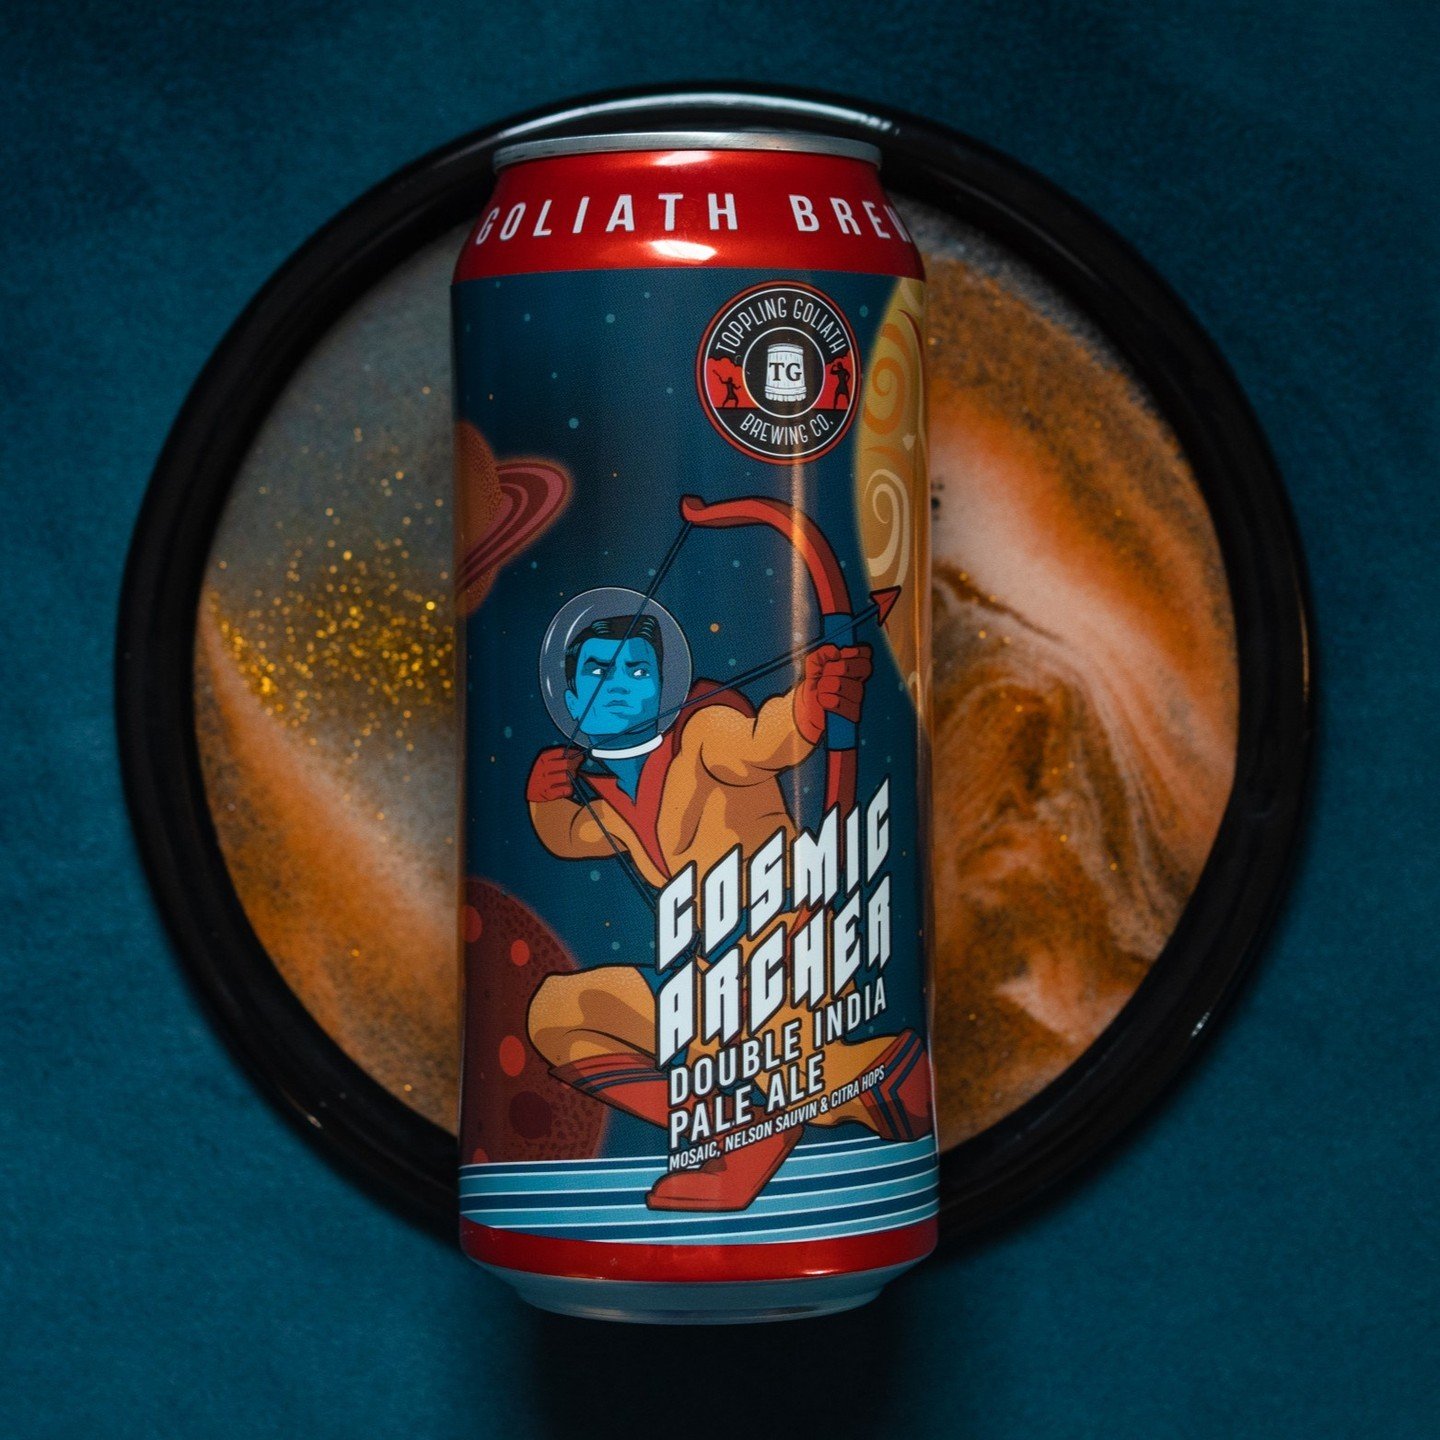 ☄️ INCOMING: An Out of This World DIPA ☄️

COSMIC ARCHER | DOUBLE IPA | 7.8% ABV 

After searching to the ends of the galaxy for hop flavors worth writing home about, Cosmic Archer points his arrow and aims for Mosaic, Nelson Sauvin and Citra hops.

